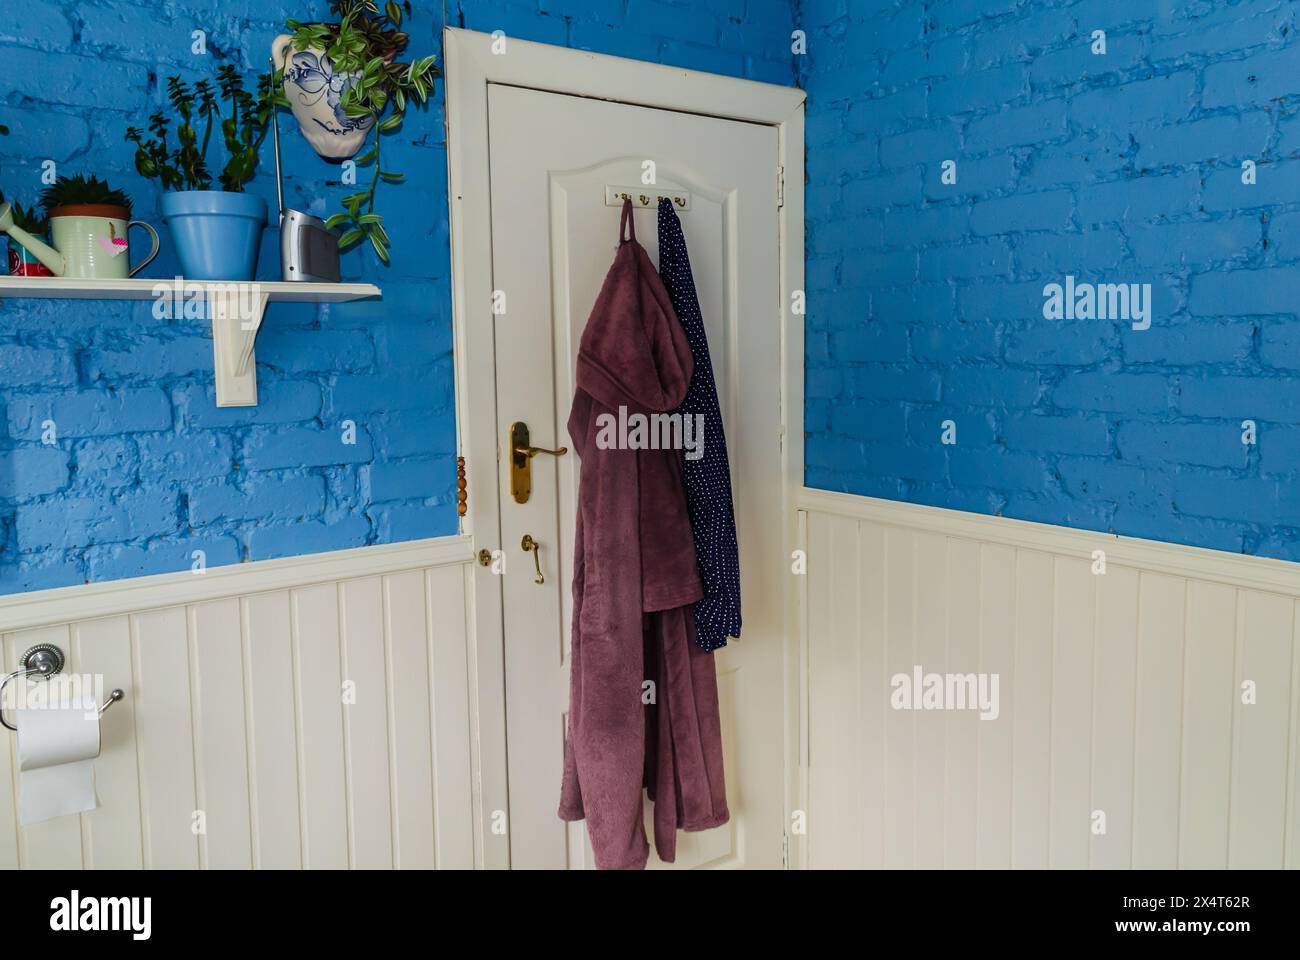 Isolated bathroom door with robes and pyjamas hanging on it and a shelf to the side Stock Photo